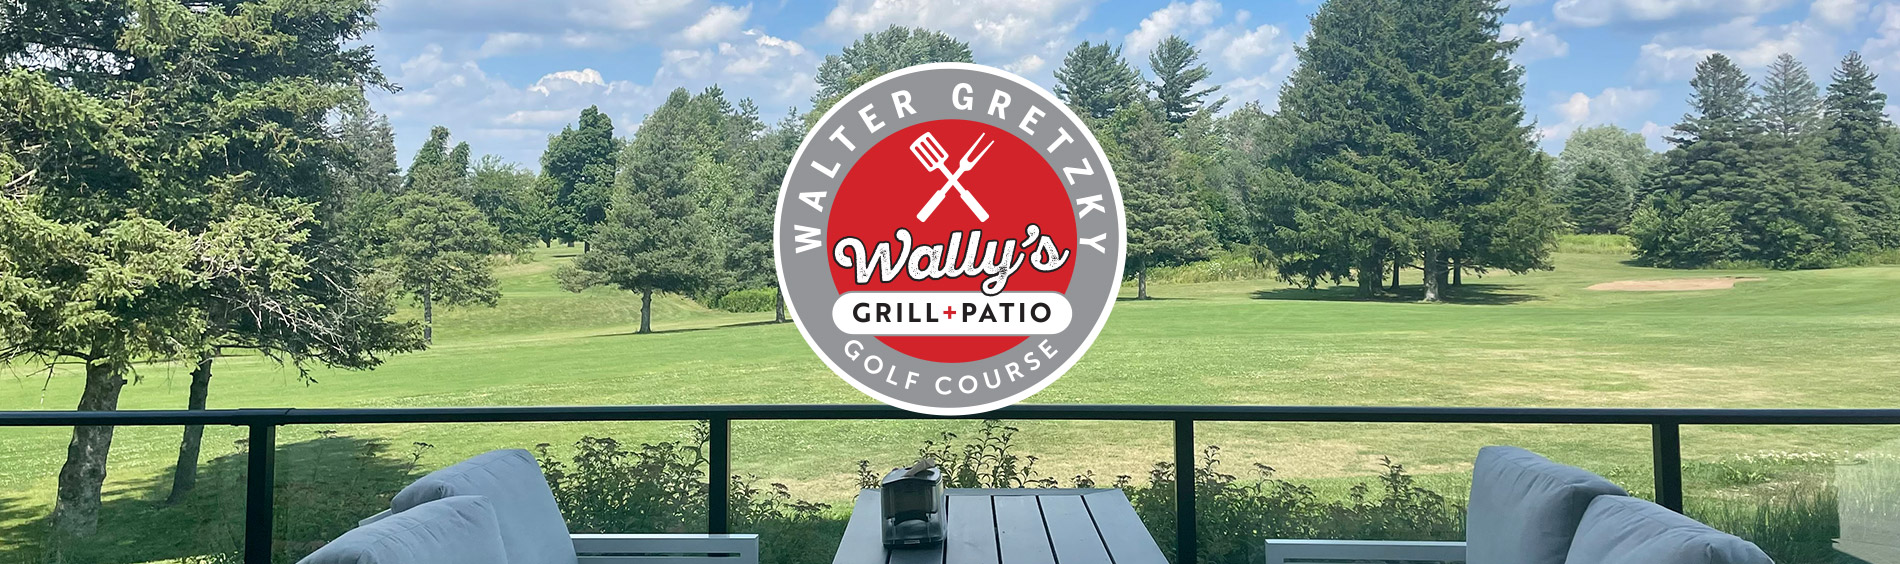 Wally's Grill+Patio